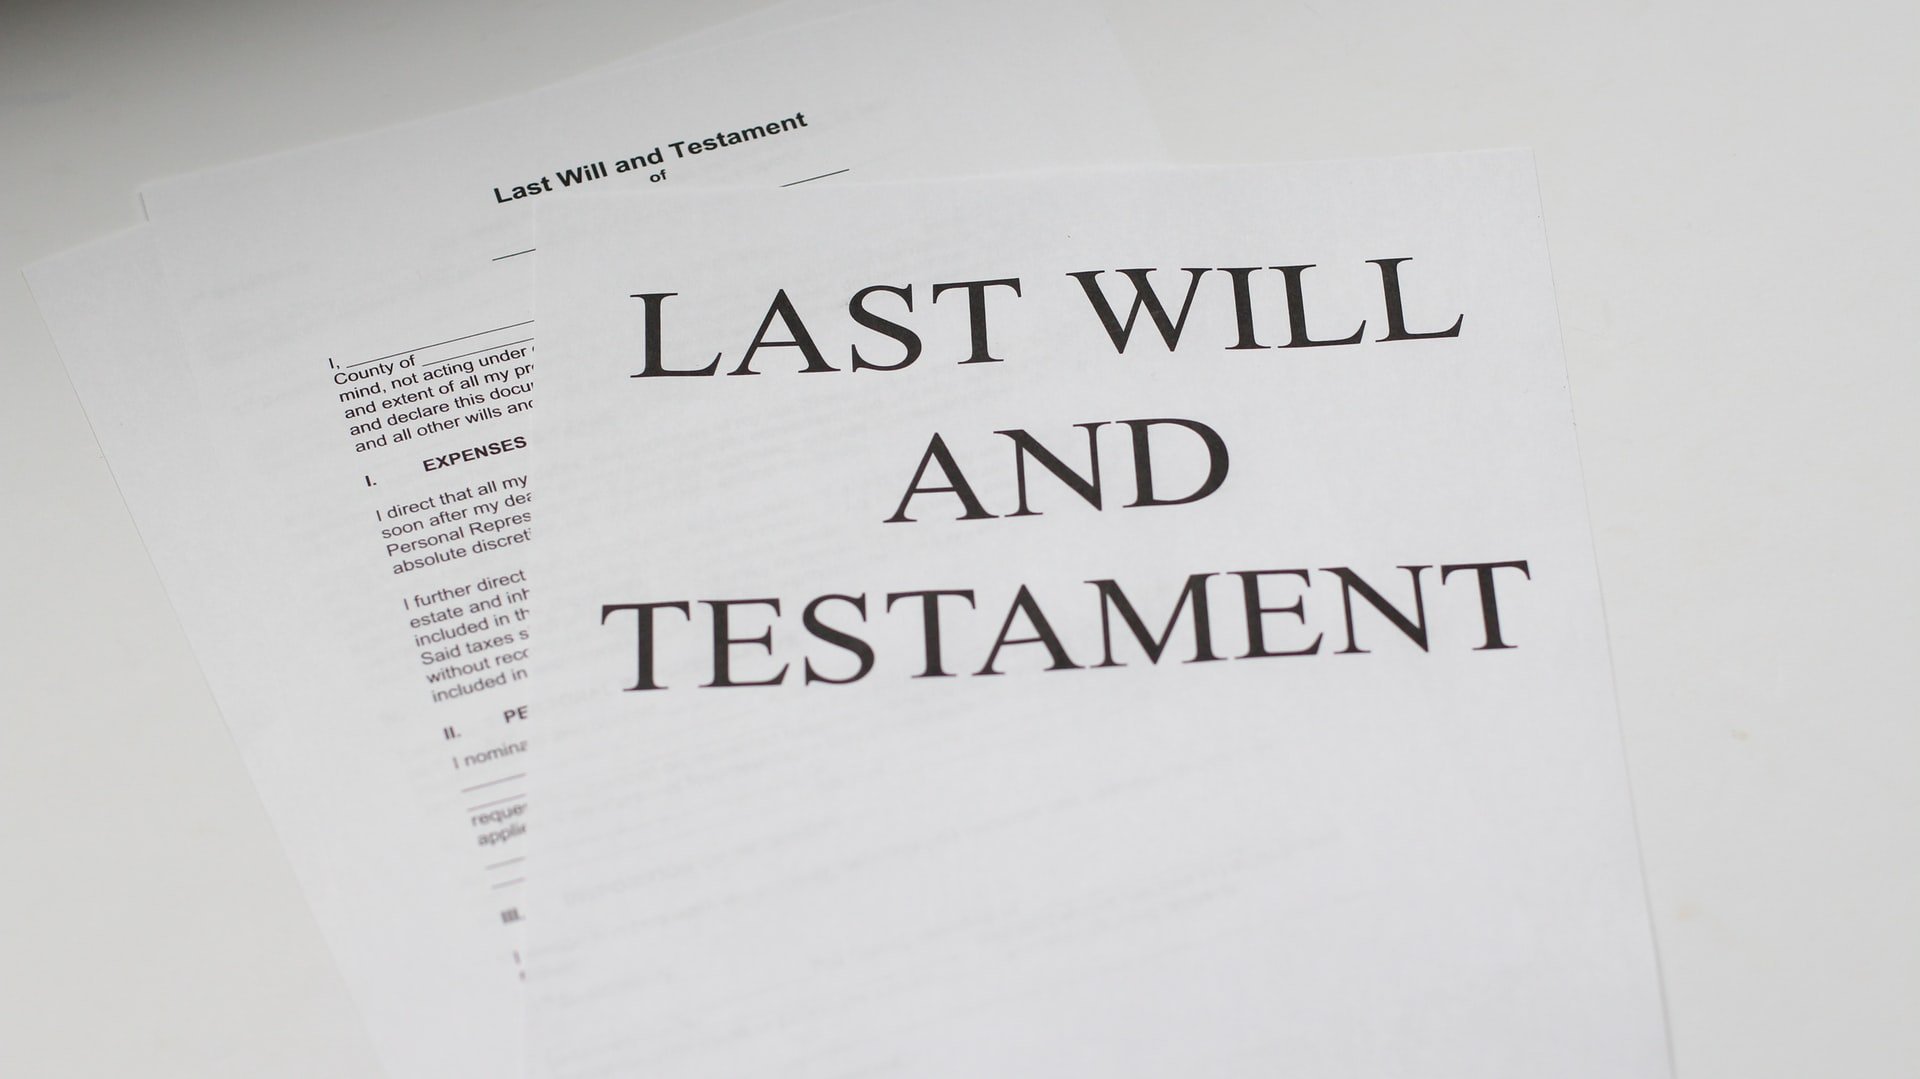 A Redditor suggested OP ask her father to finalize his will. | Source: Unsplash